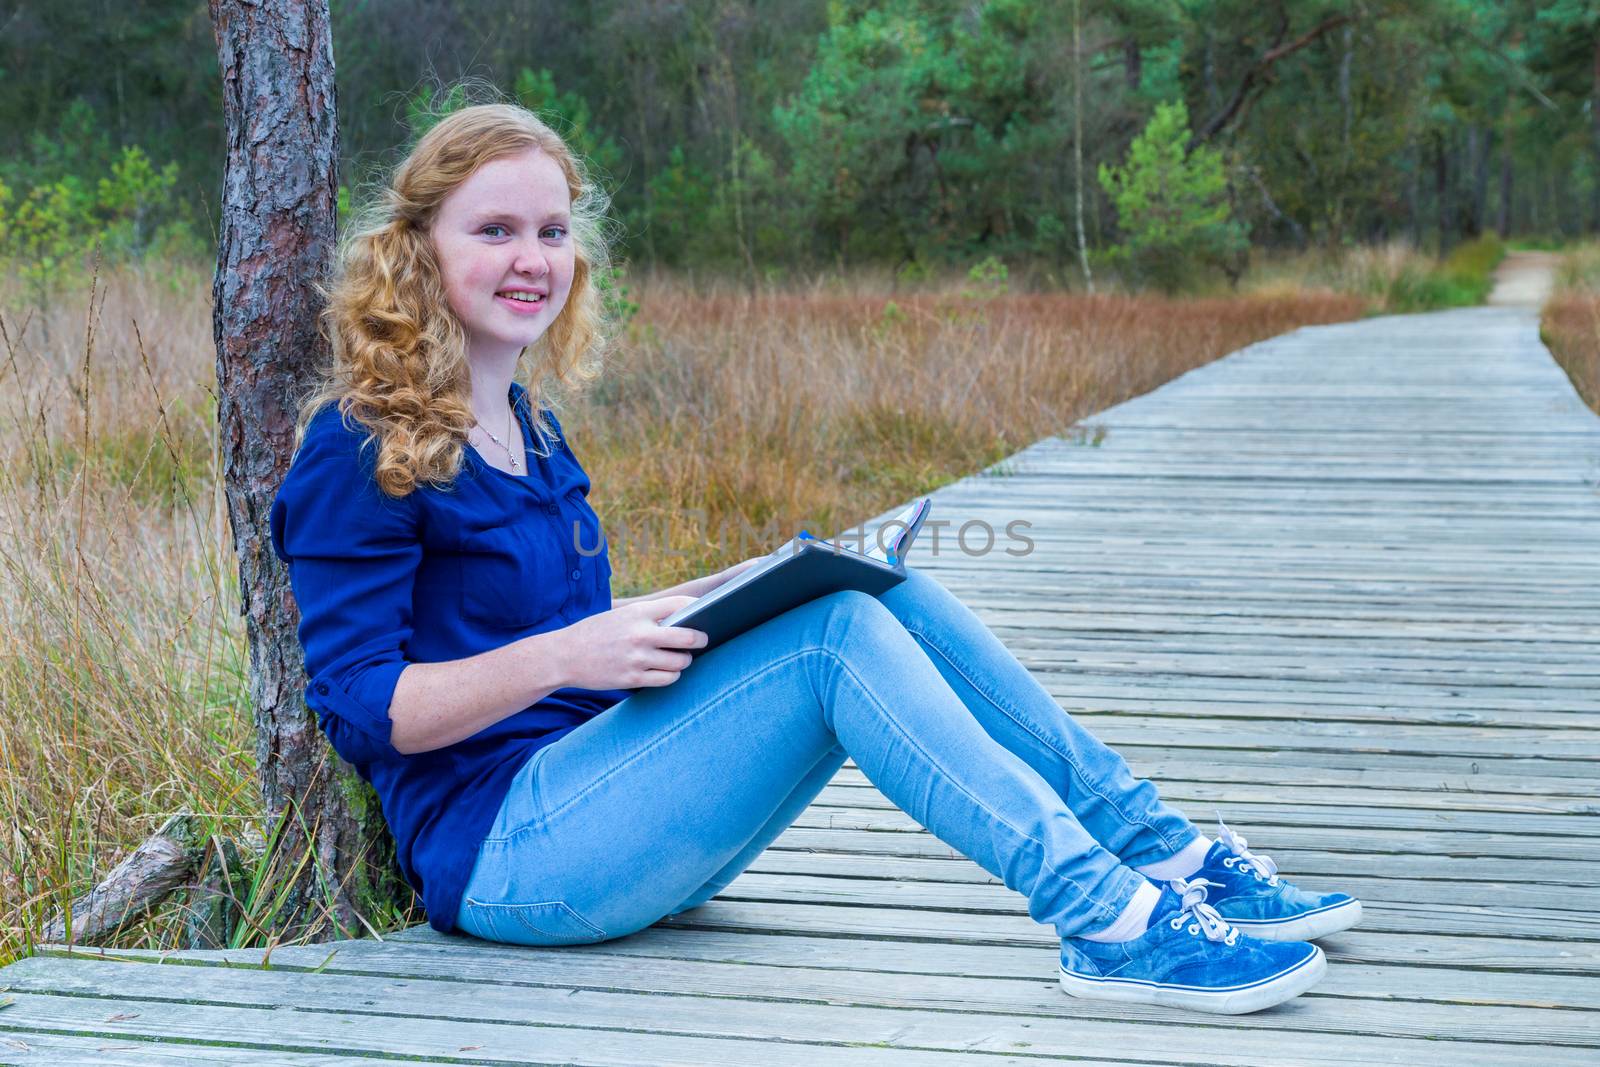 European teenage girl reading book on wooden path in forest